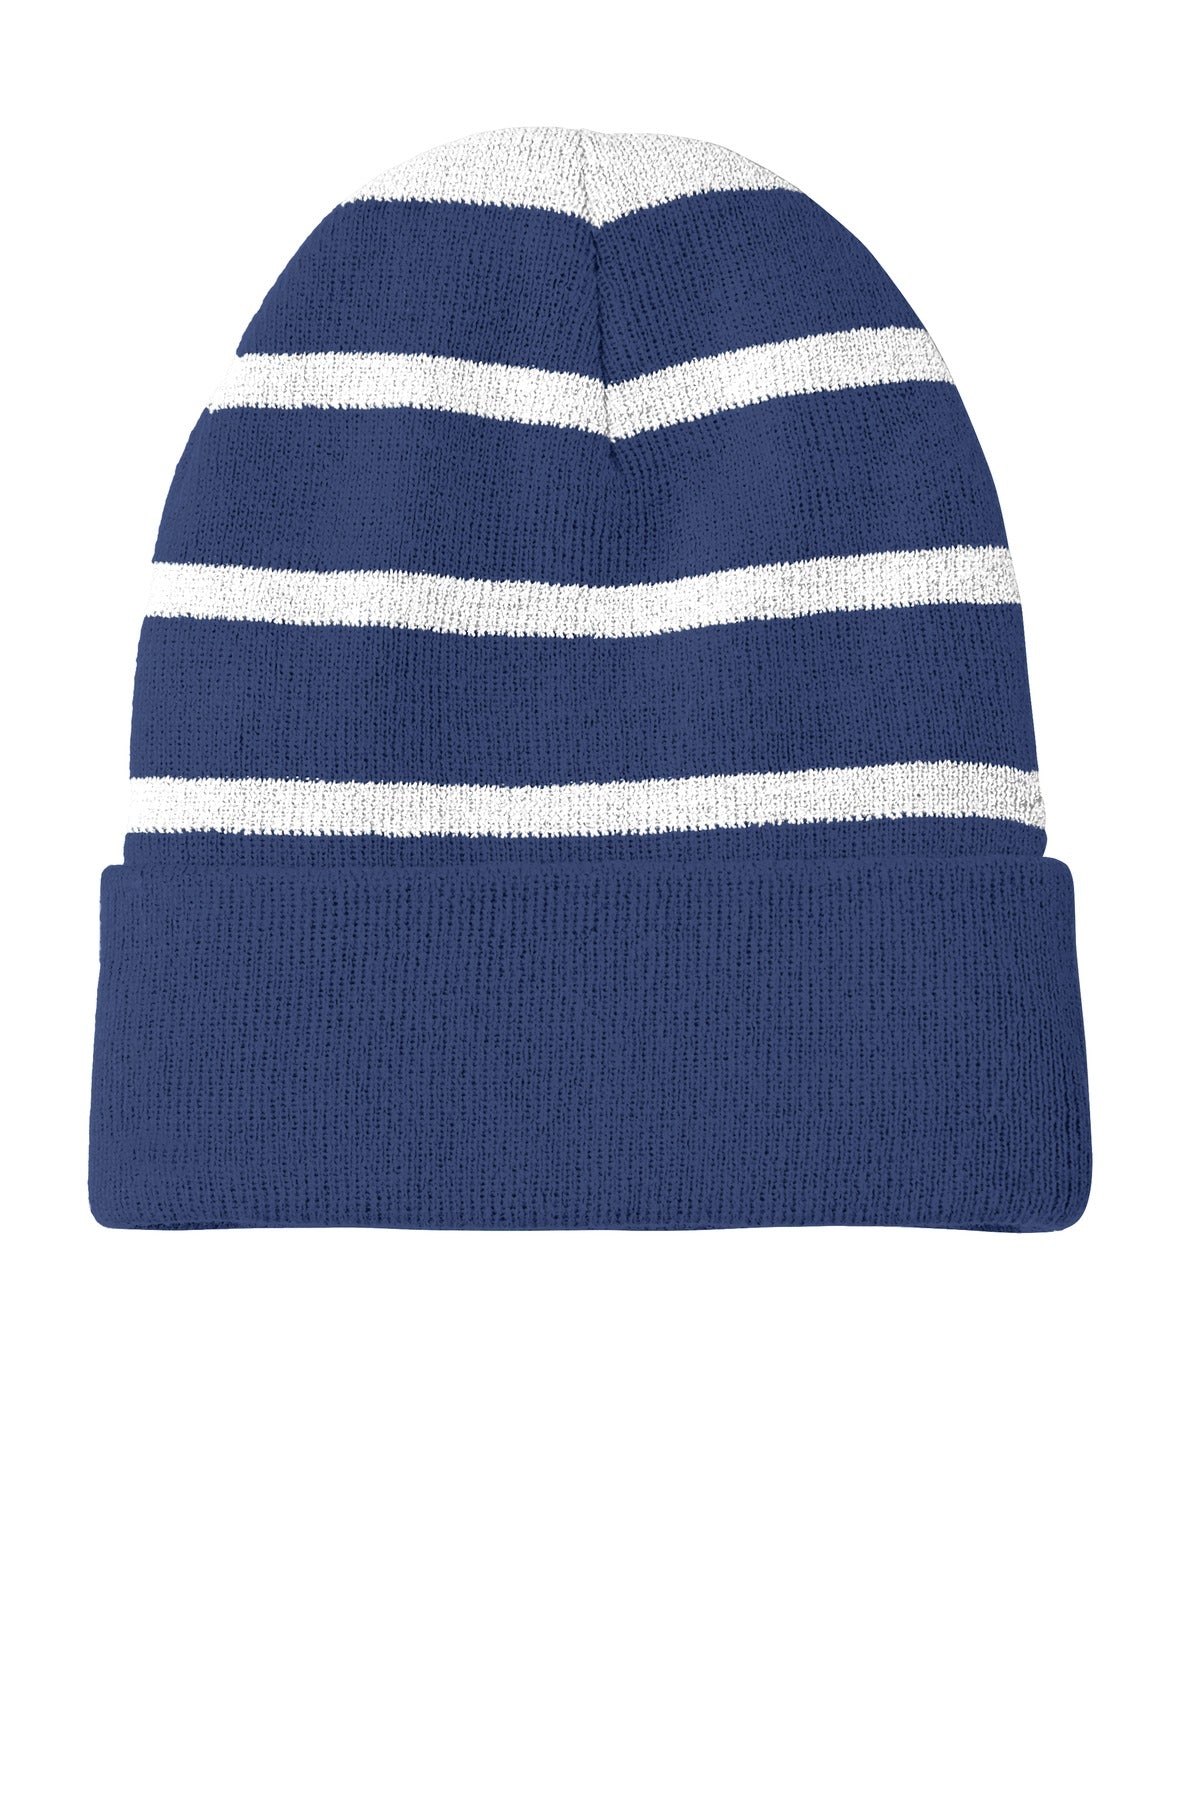 Sport-Tek® Striped Beanie with Solid Band. STC31